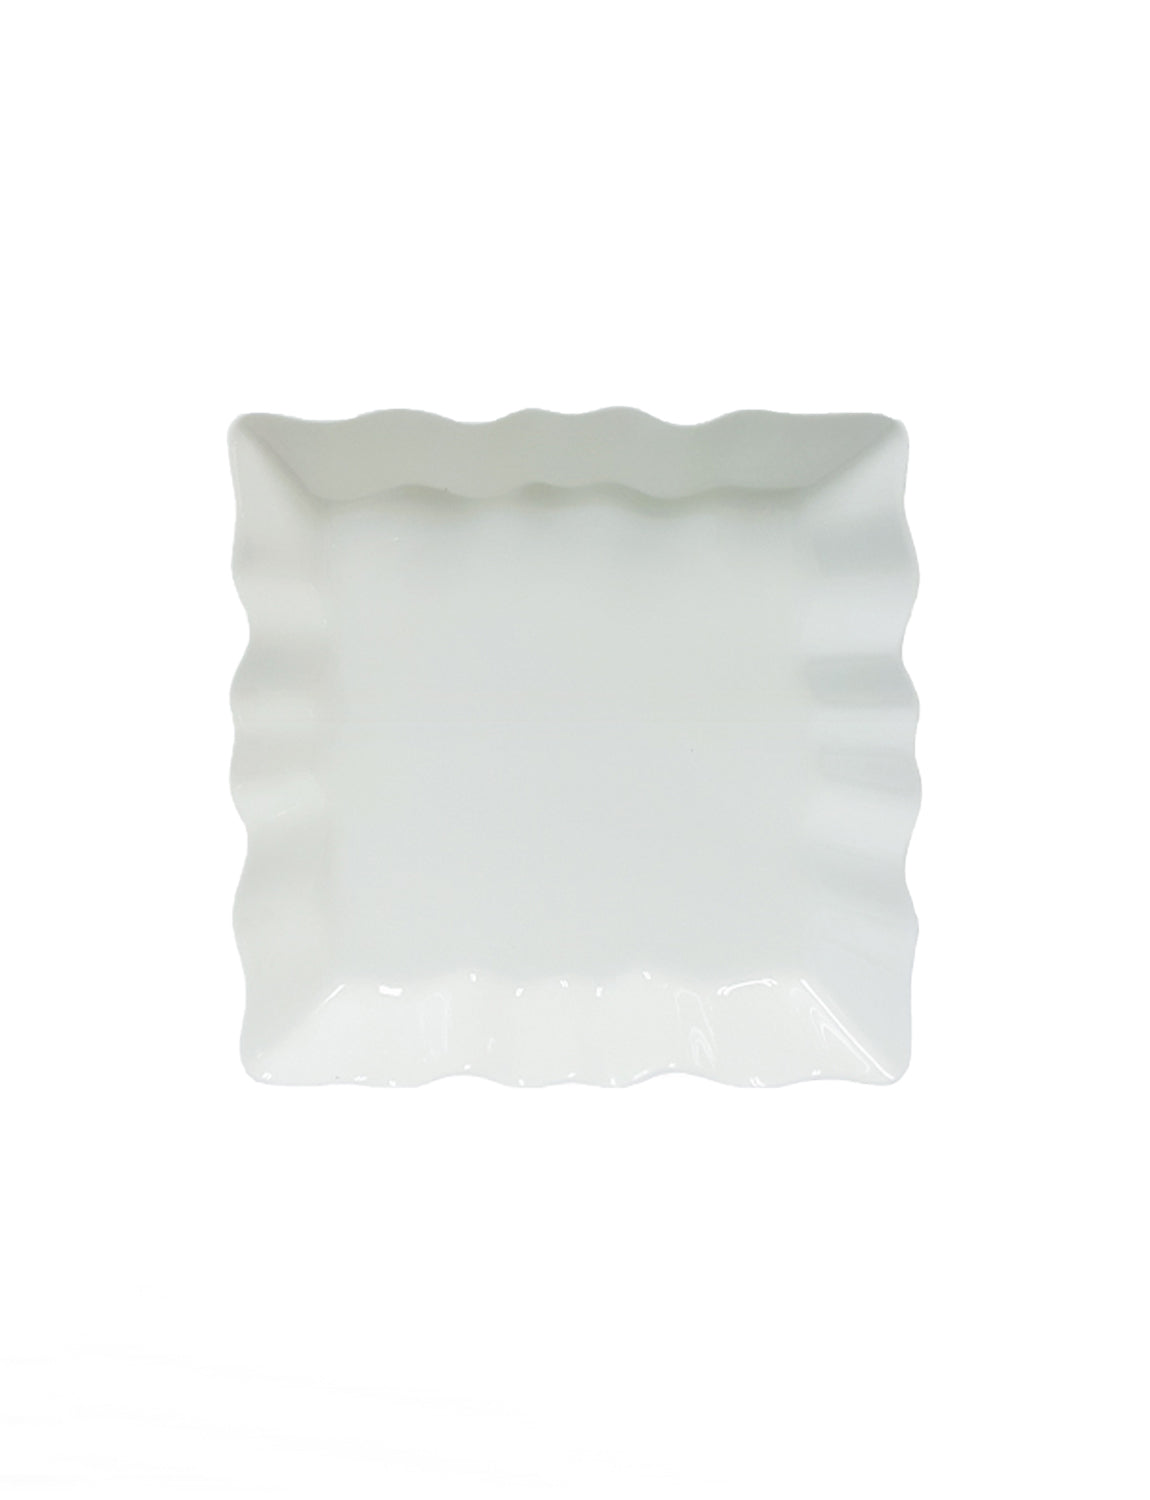 Twig White Serving Lace Square Plate, large